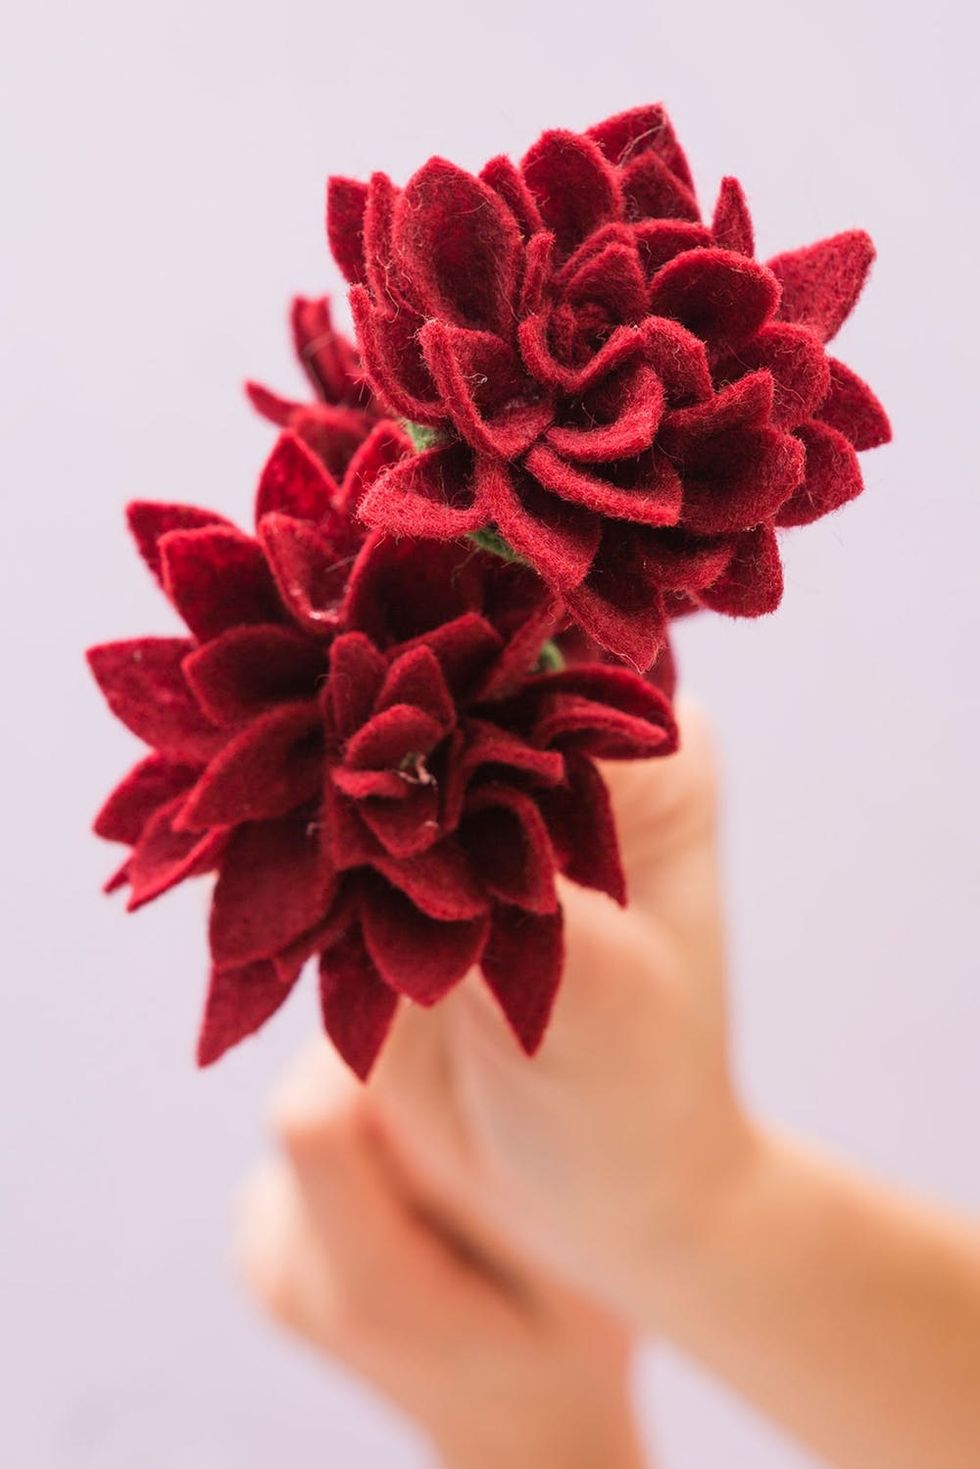 Send Your BFF This Felt Bouquet for Galentine’s Day - Brit + Co